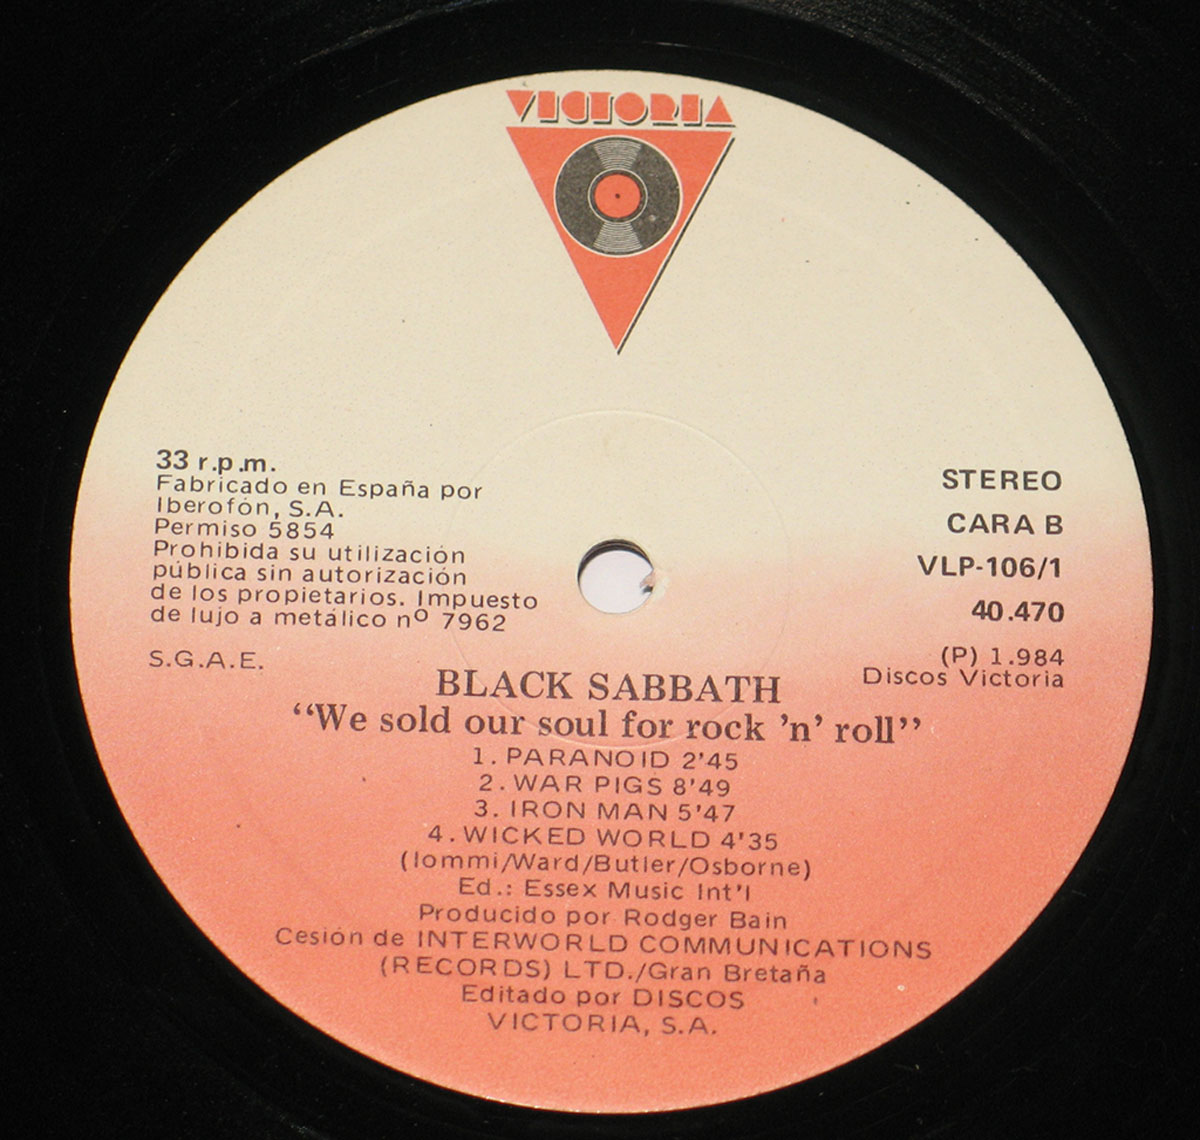 High Resolution Photo BLACK SABBATH - We Sold Our Soul for Rock and Roll 